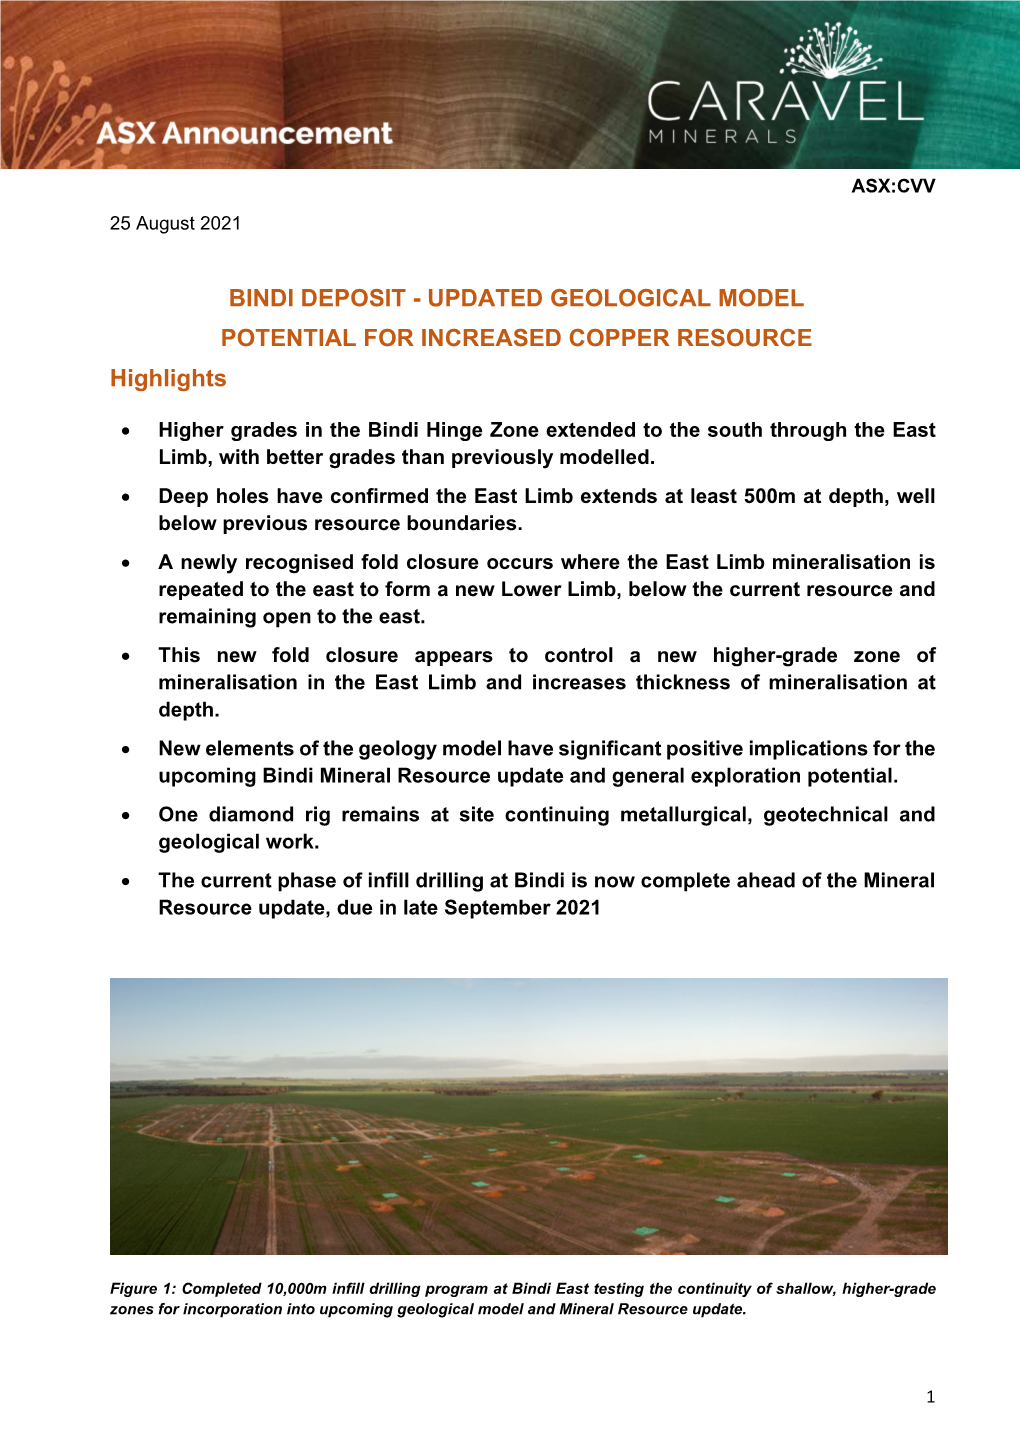 BINDI DEPOSIT - UPDATED GEOLOGICAL MODEL POTENTIAL for INCREASED COPPER RESOURCE Highlights